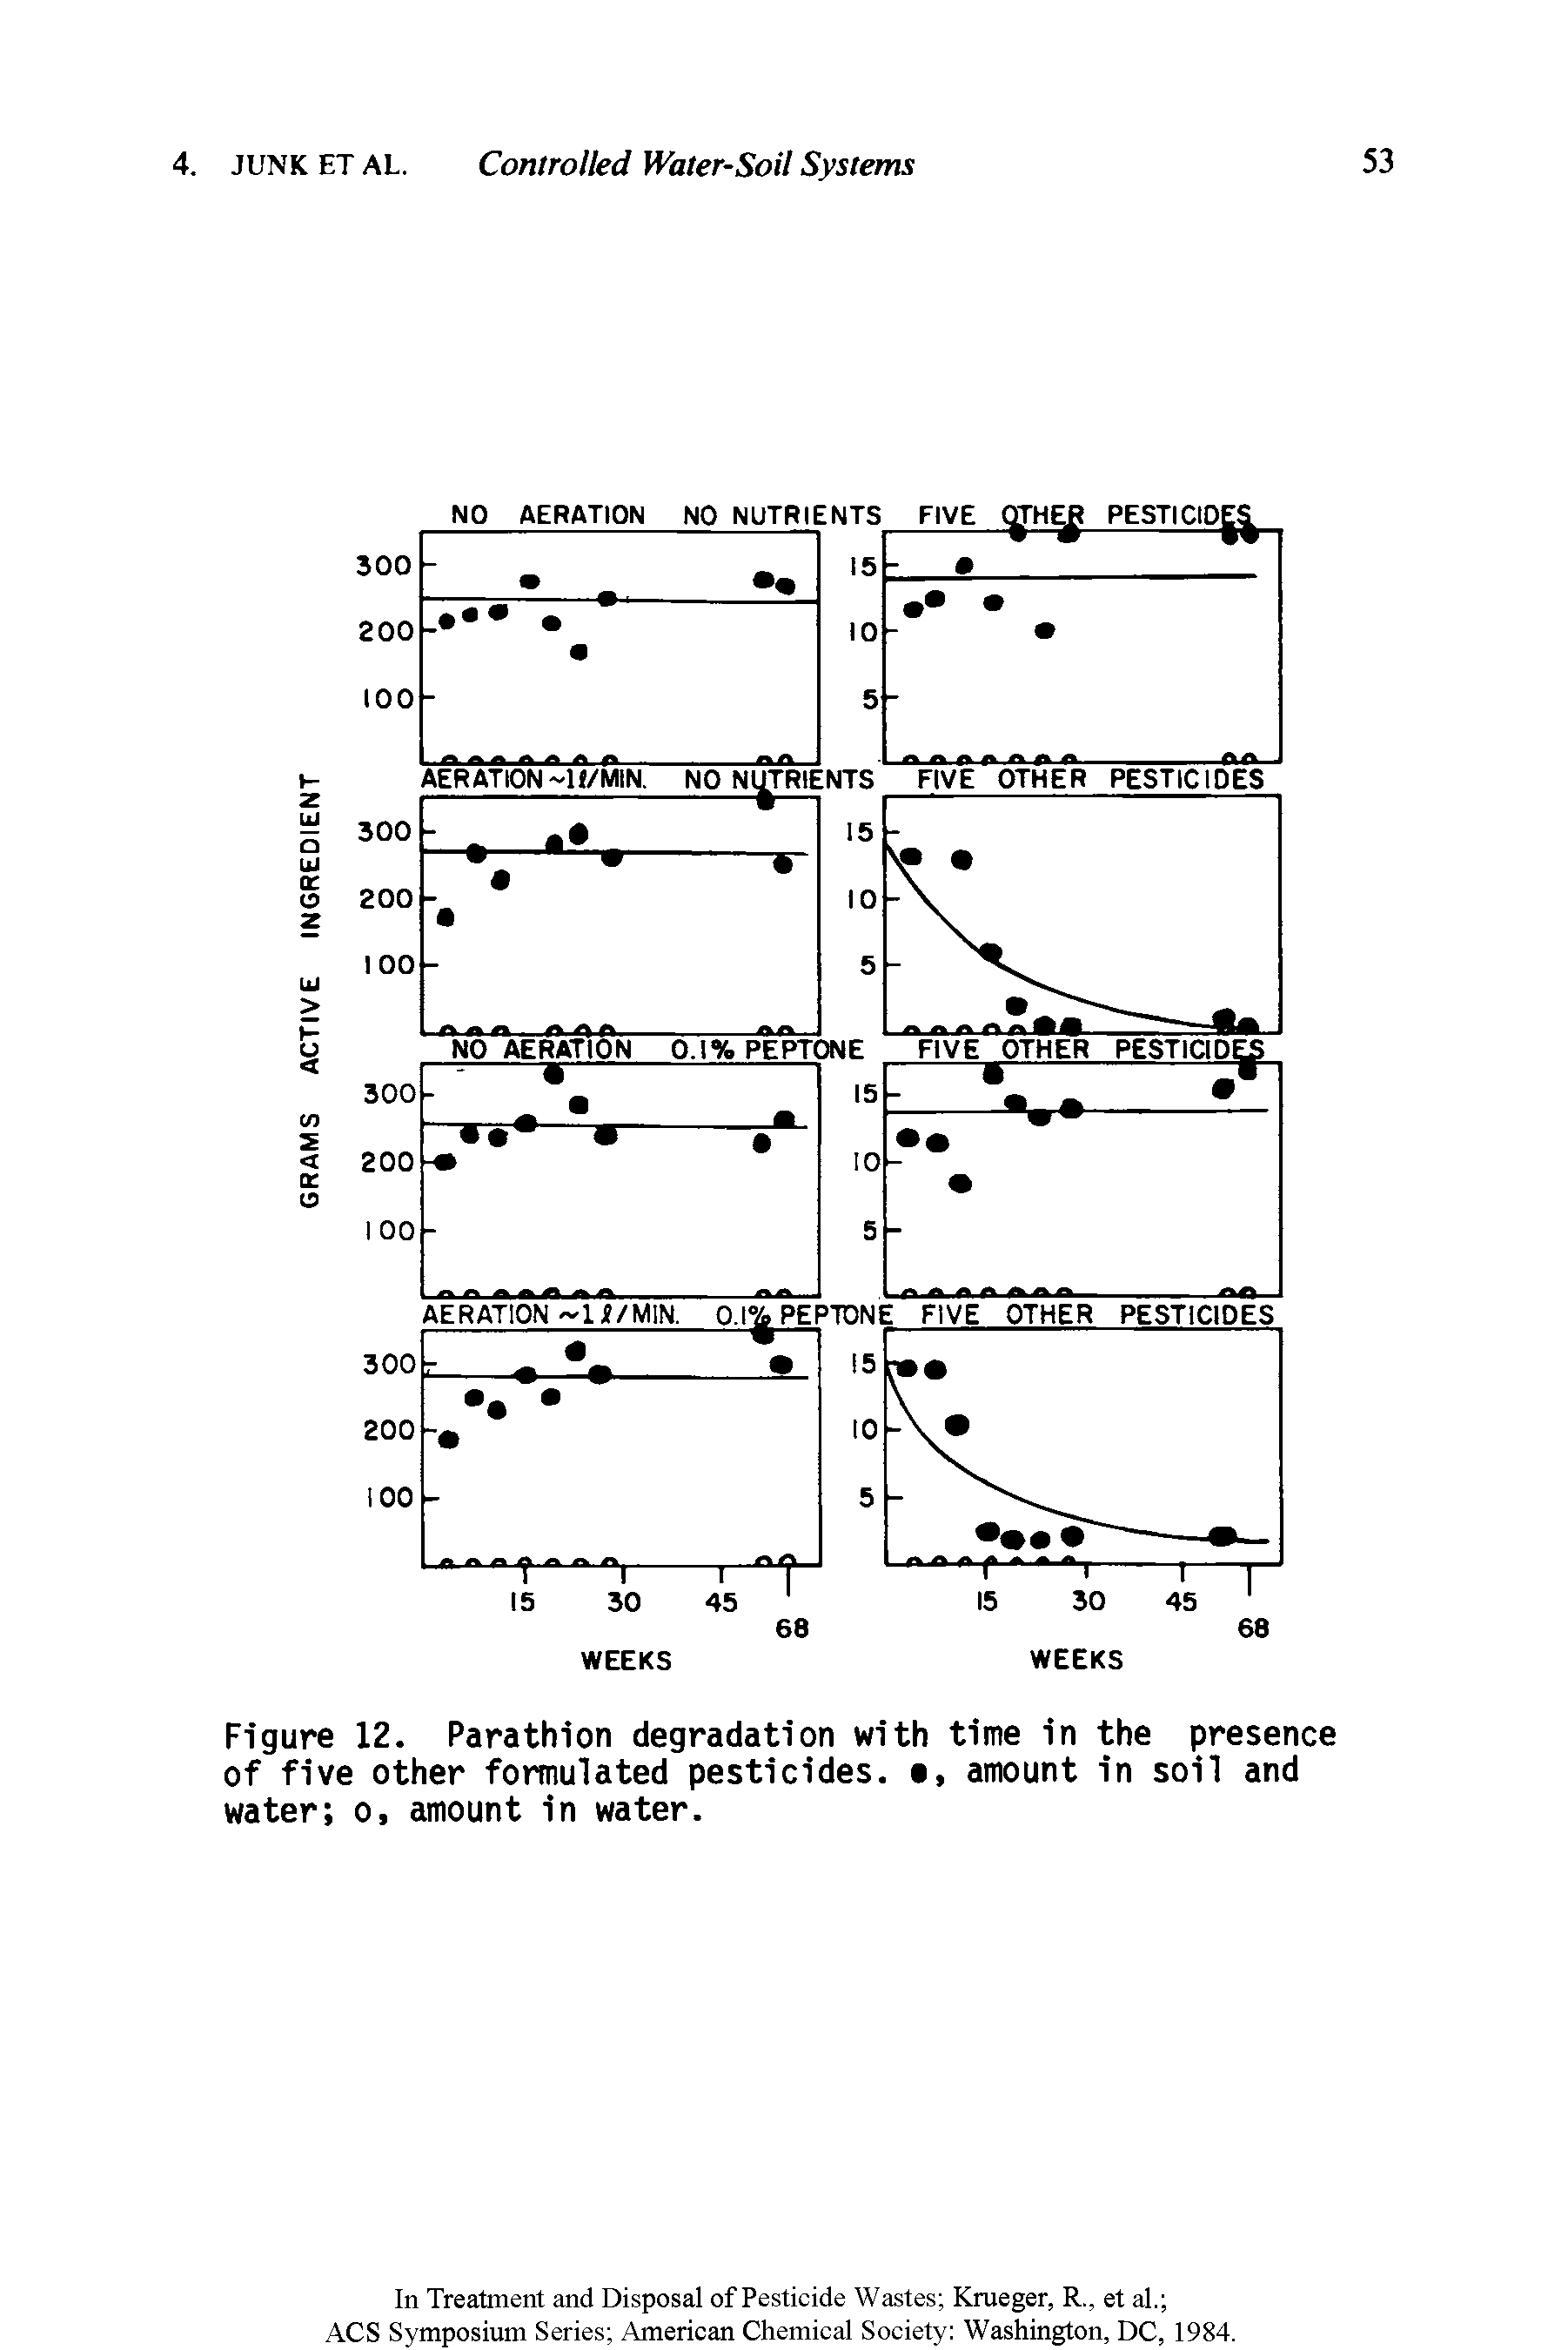 Figure 12. Parathion degradation with time in the presence of five other formulated pesticides. , amount in soil and water o, amount in water.